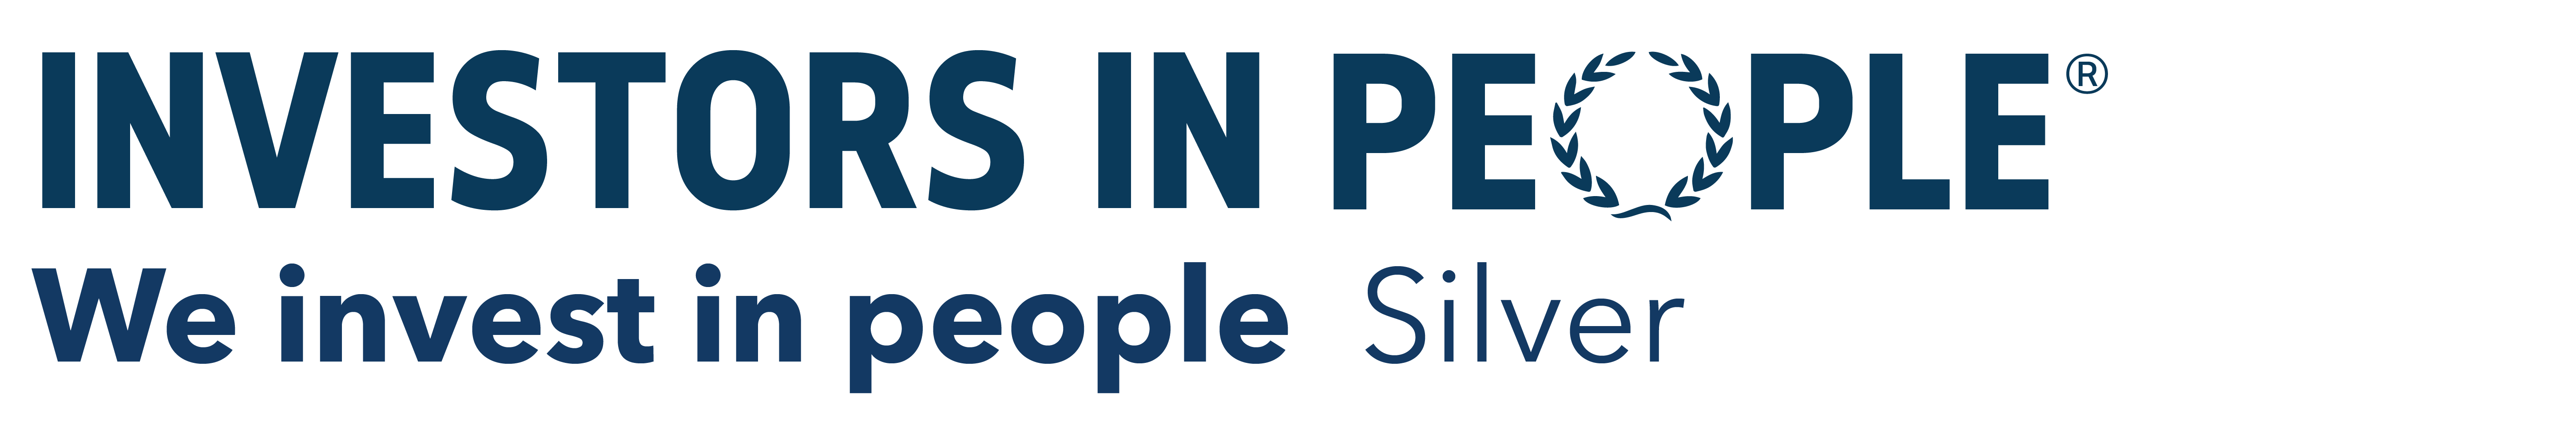 Investors in People Silver accreditation logo